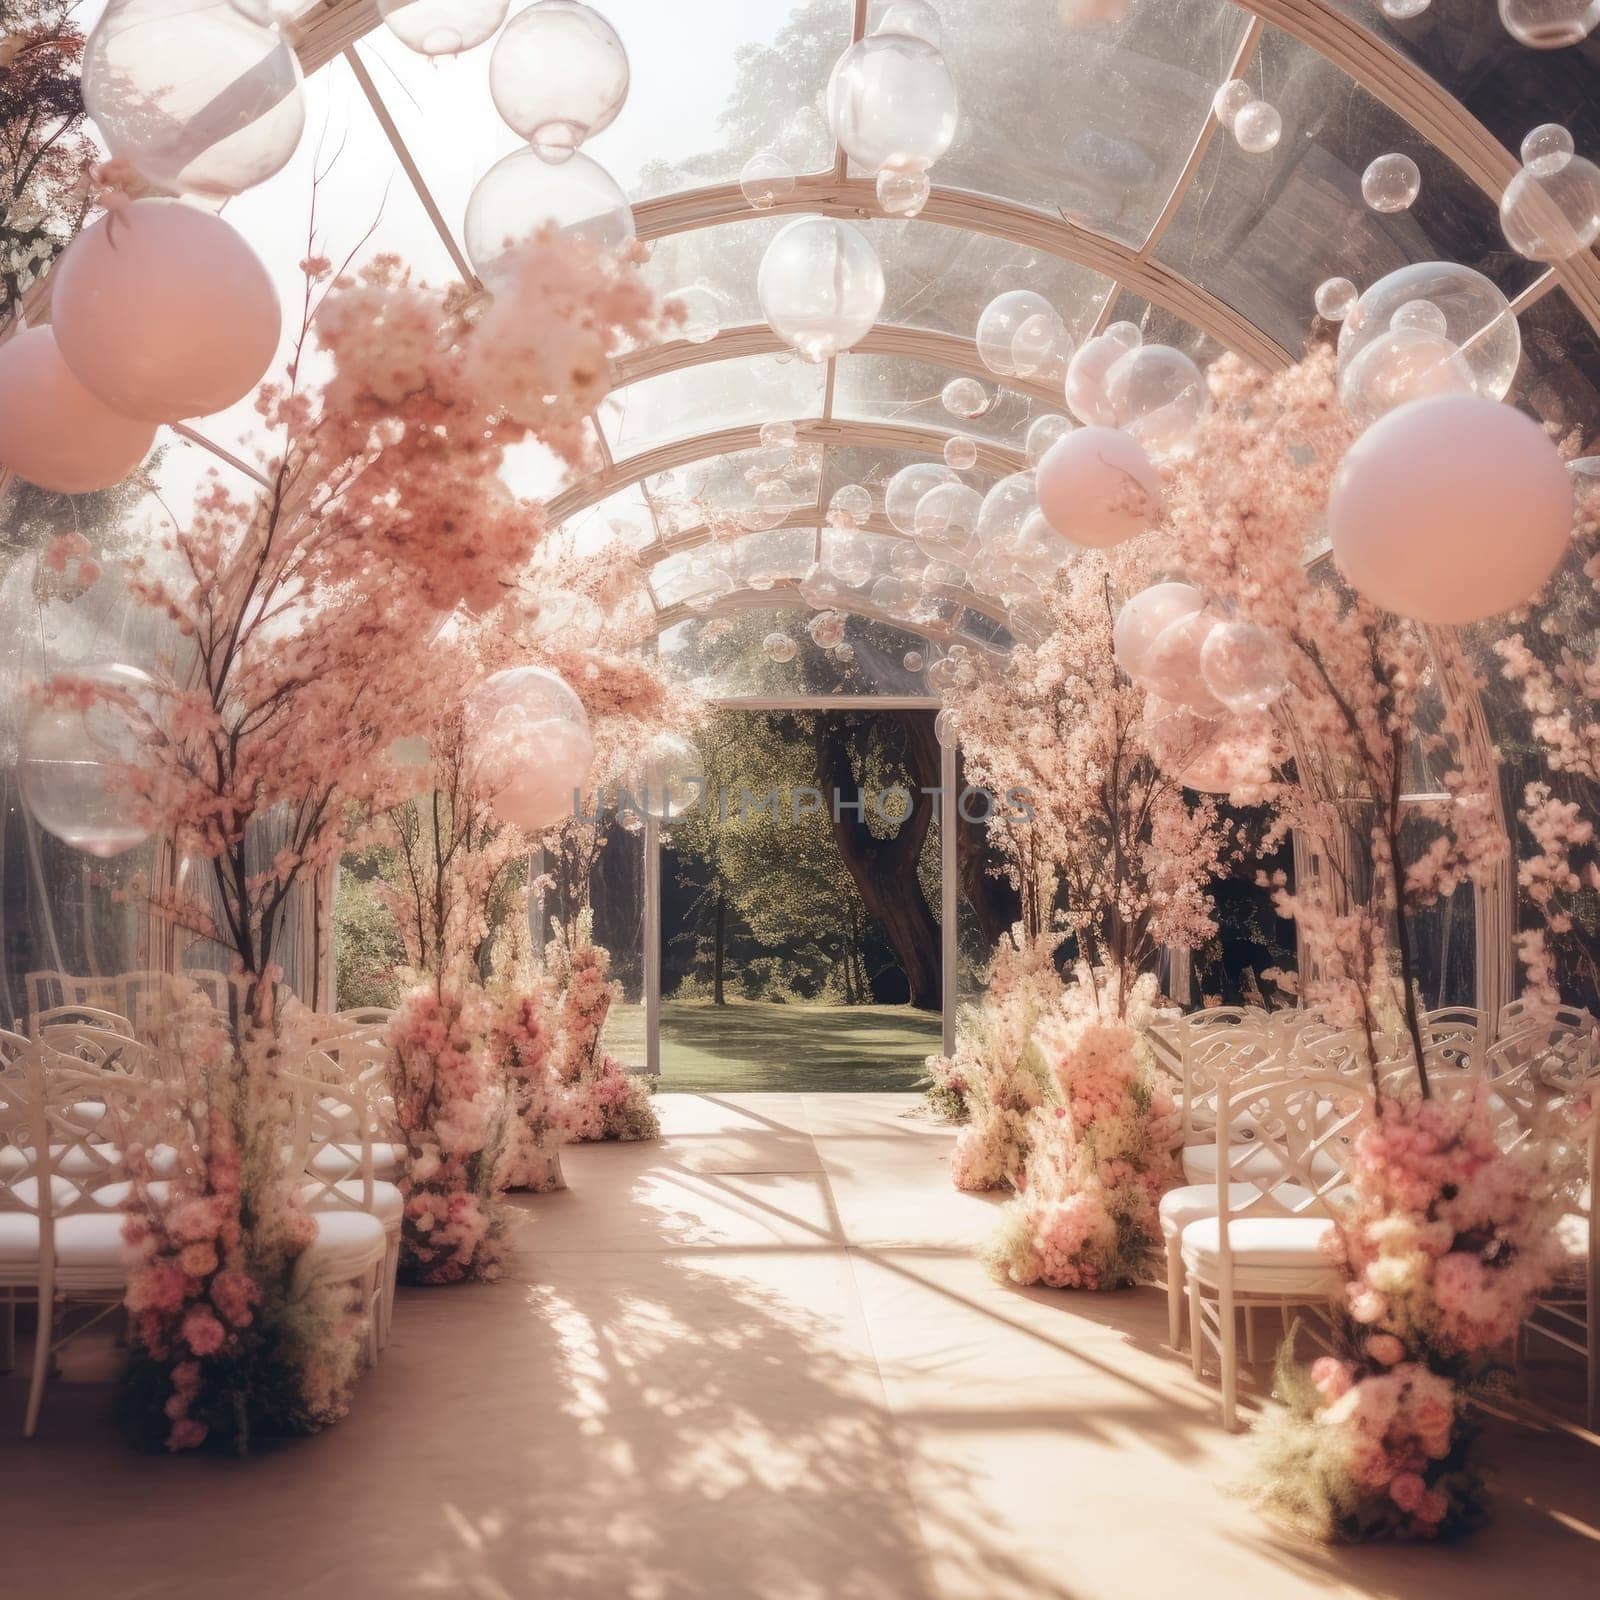 Wedding decoration. The concept of the perfect wedding